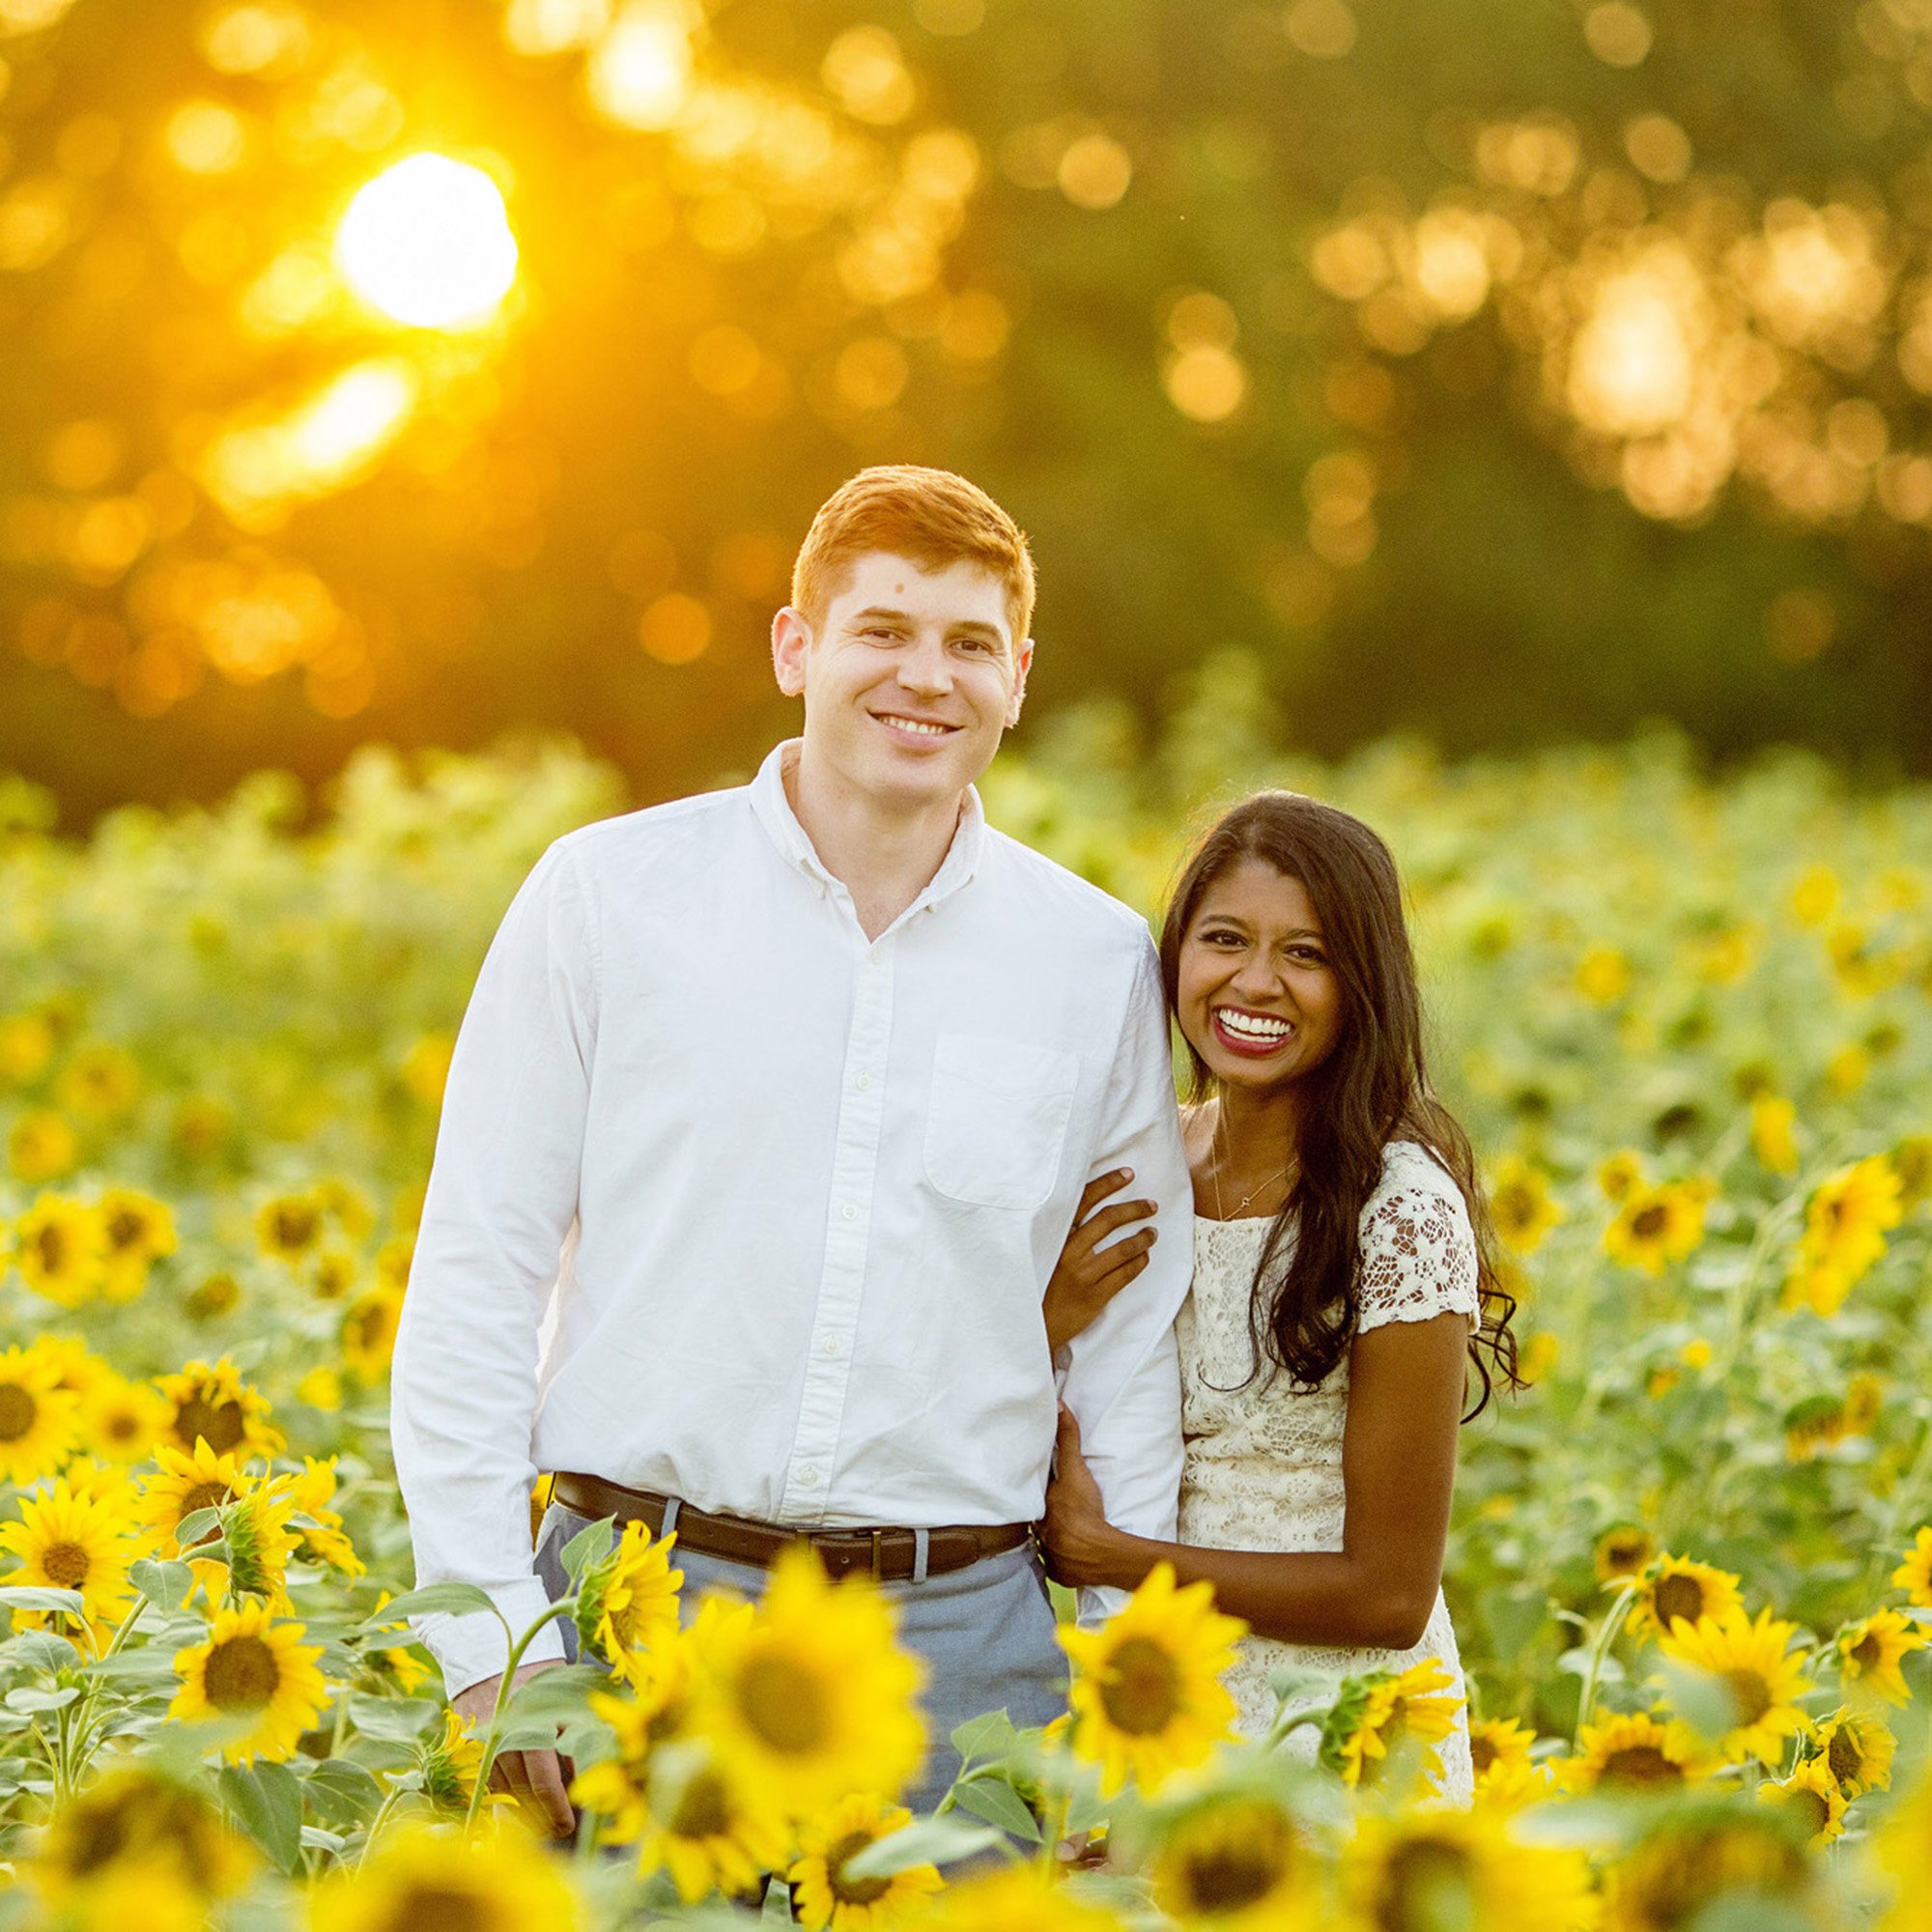 Seriously_Sabrina_Photography_Lexington_Midway_Kentucky_Engagement_Merefield_Sunflowers_Naz_and_Drew2.jpg